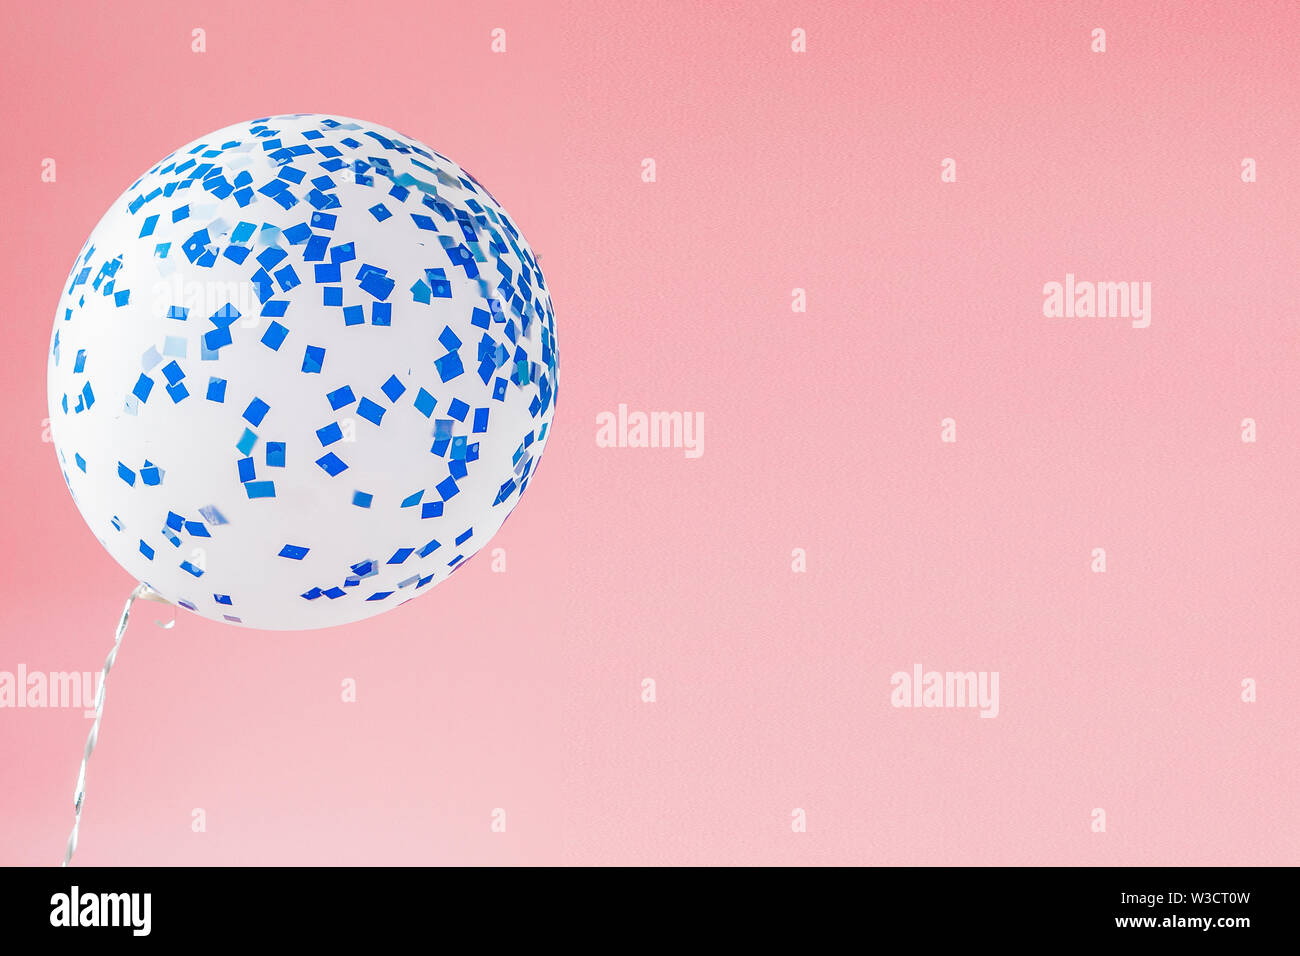 Festive Pink Background Shining Stars And Balloon On Light Pink